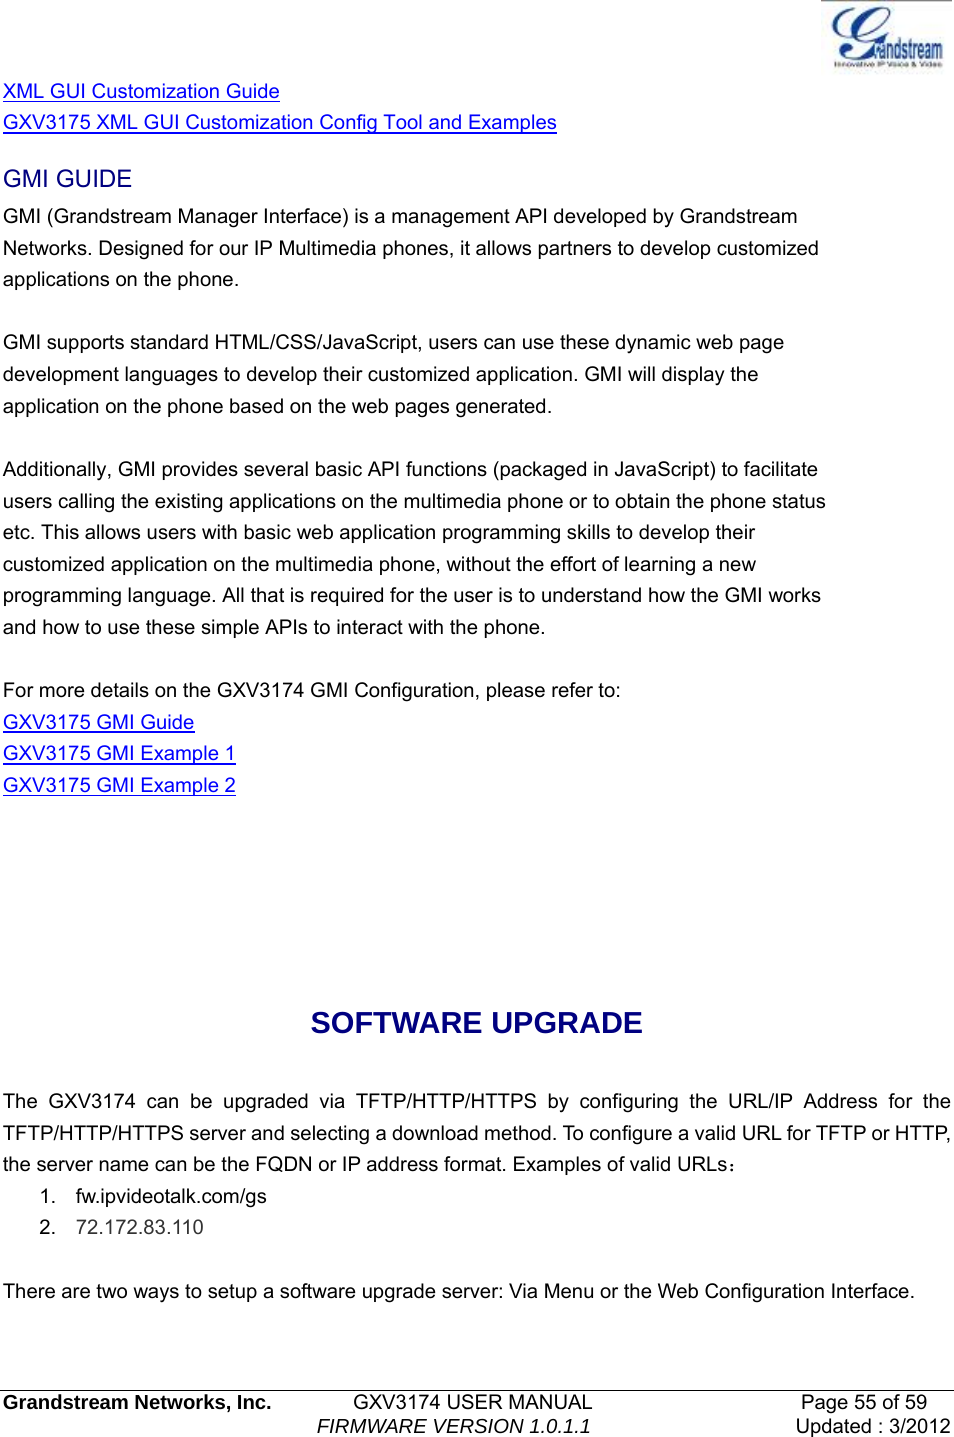   Grandstream Networks, Inc.        GXV3174 USER MANUAL                     Page 55 of 59                                FIRMWARE VERSION 1.0.1.1  Updated : 3/2012  XML GUI Customization Guide GXV3175 XML GUI Customization Config Tool and Examples GMI GUIDE GMI (Grandstream Manager Interface) is a management API developed by Grandstream Networks. Designed for our IP Multimedia phones, it allows partners to develop customized applications on the phone.  GMI supports standard HTML/CSS/JavaScript, users can use these dynamic web page development languages to develop their customized application. GMI will display the application on the phone based on the web pages generated.  Additionally, GMI provides several basic API functions (packaged in JavaScript) to facilitate users calling the existing applications on the multimedia phone or to obtain the phone status etc. This allows users with basic web application programming skills to develop their customized application on the multimedia phone, without the effort of learning a new programming language. All that is required for the user is to understand how the GMI works and how to use these simple APIs to interact with the phone.  For more details on the GXV3174 GMI Configuration, please refer to: GXV3175 GMI Guide GXV3175 GMI Example 1 GXV3175 GMI Example 2    SOFTWARE UPGRADE  The GXV3174 can be upgraded via TFTP/HTTP/HTTPS by configuring the URL/IP Address for the TFTP/HTTP/HTTPS server and selecting a download method. To configure a valid URL for TFTP or HTTP, the server name can be the FQDN or IP address format. Examples of valid URLs： 1. fw.ipvideotalk.com/gs 2.  72.172.83.110  There are two ways to setup a software upgrade server: Via Menu or the Web Configuration Interface.  